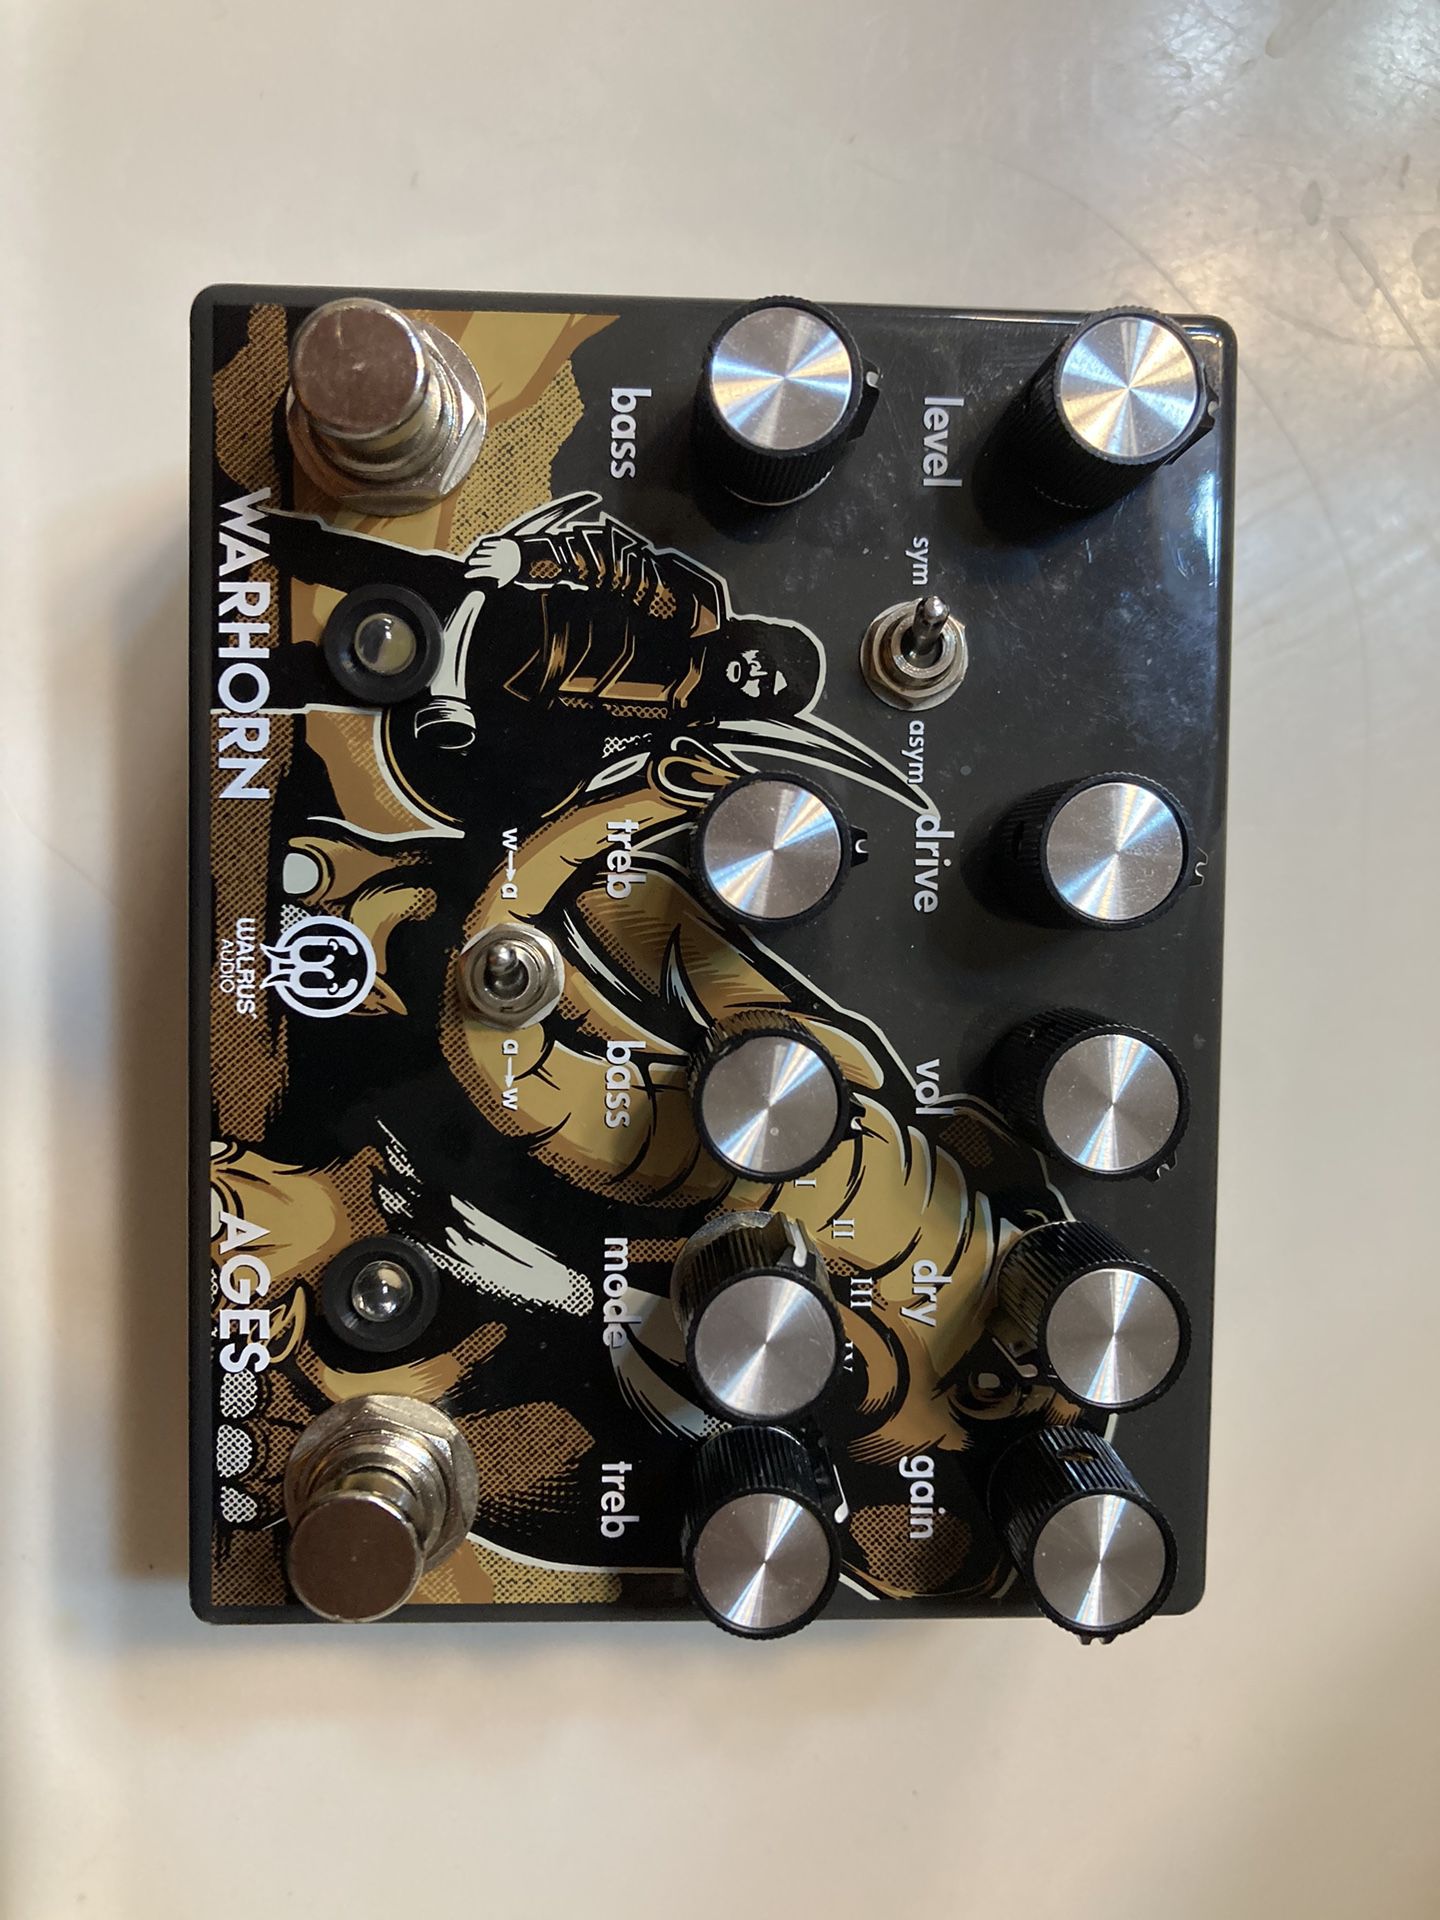 Walrus Audio Warhorn/Ages overdrive